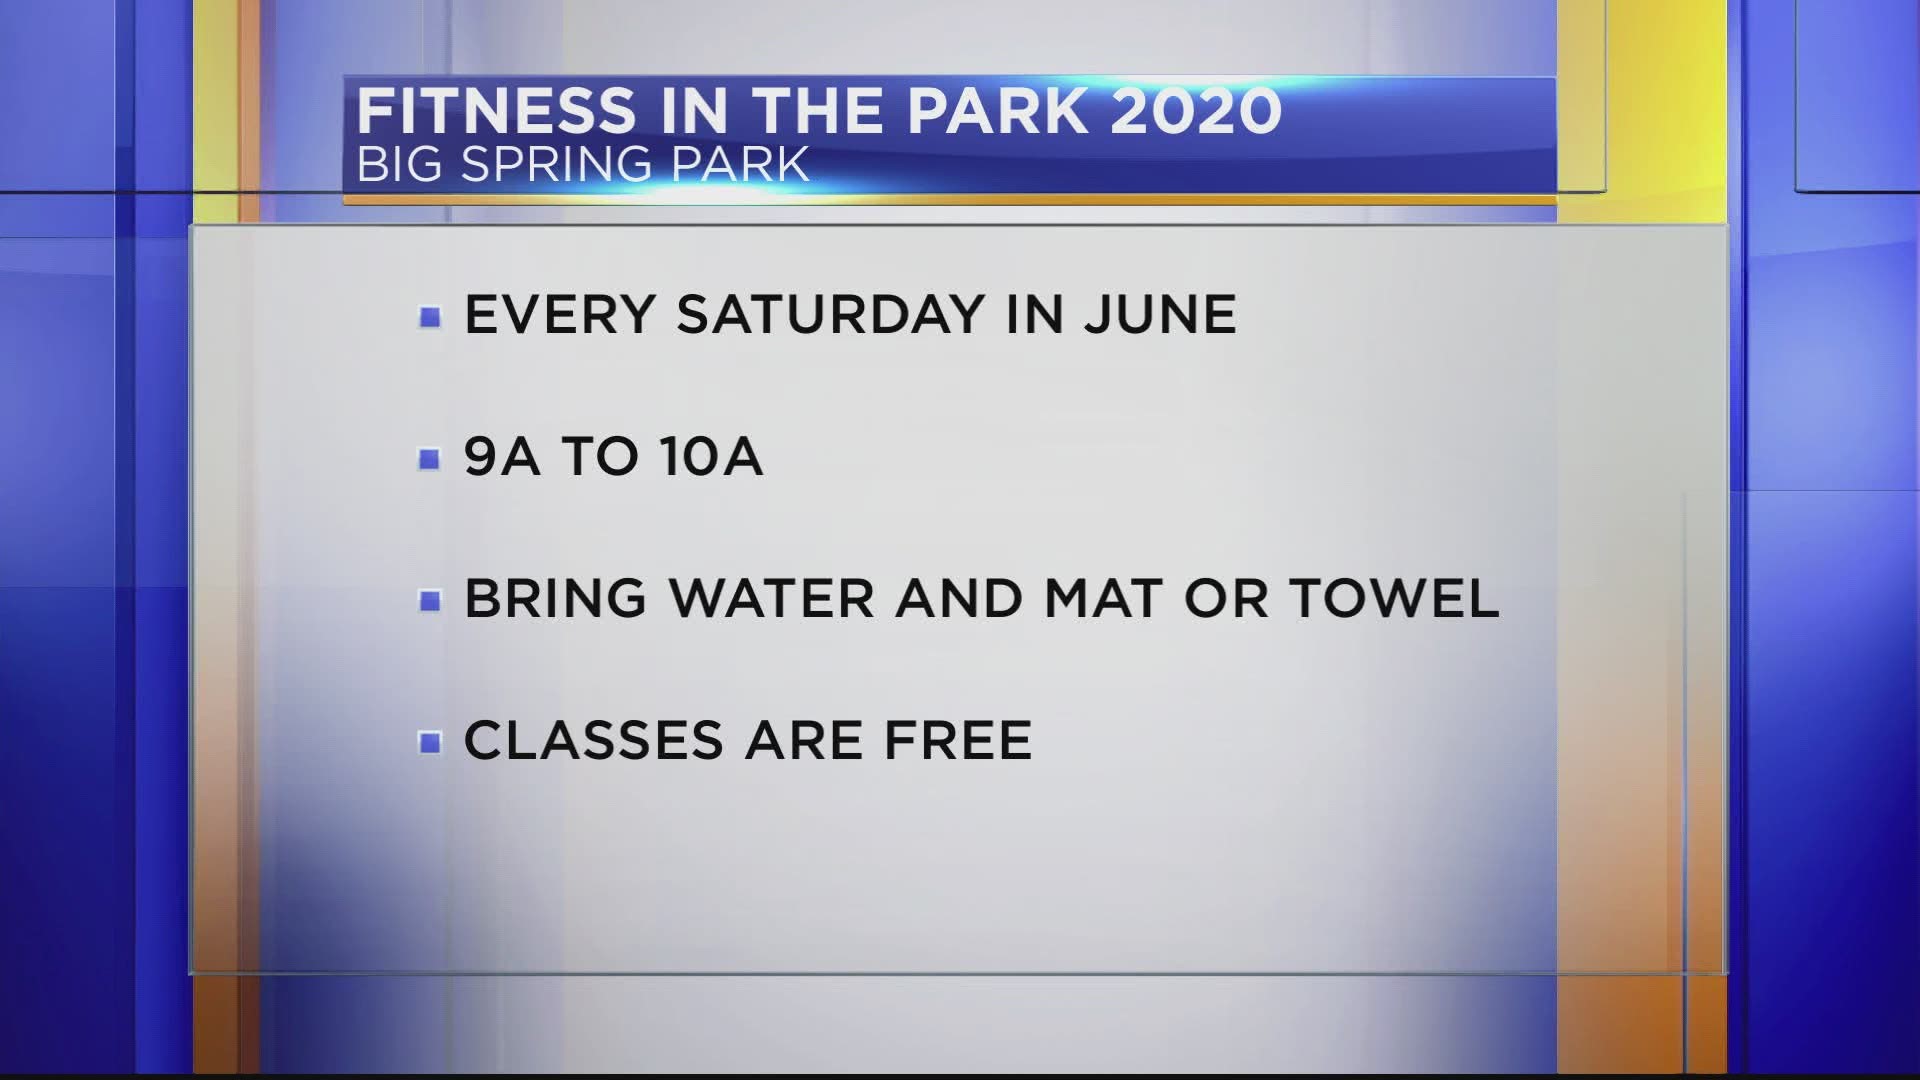 Join Healthy Huntsville for free fitness classes at Big Spring Park every Saturday in June!